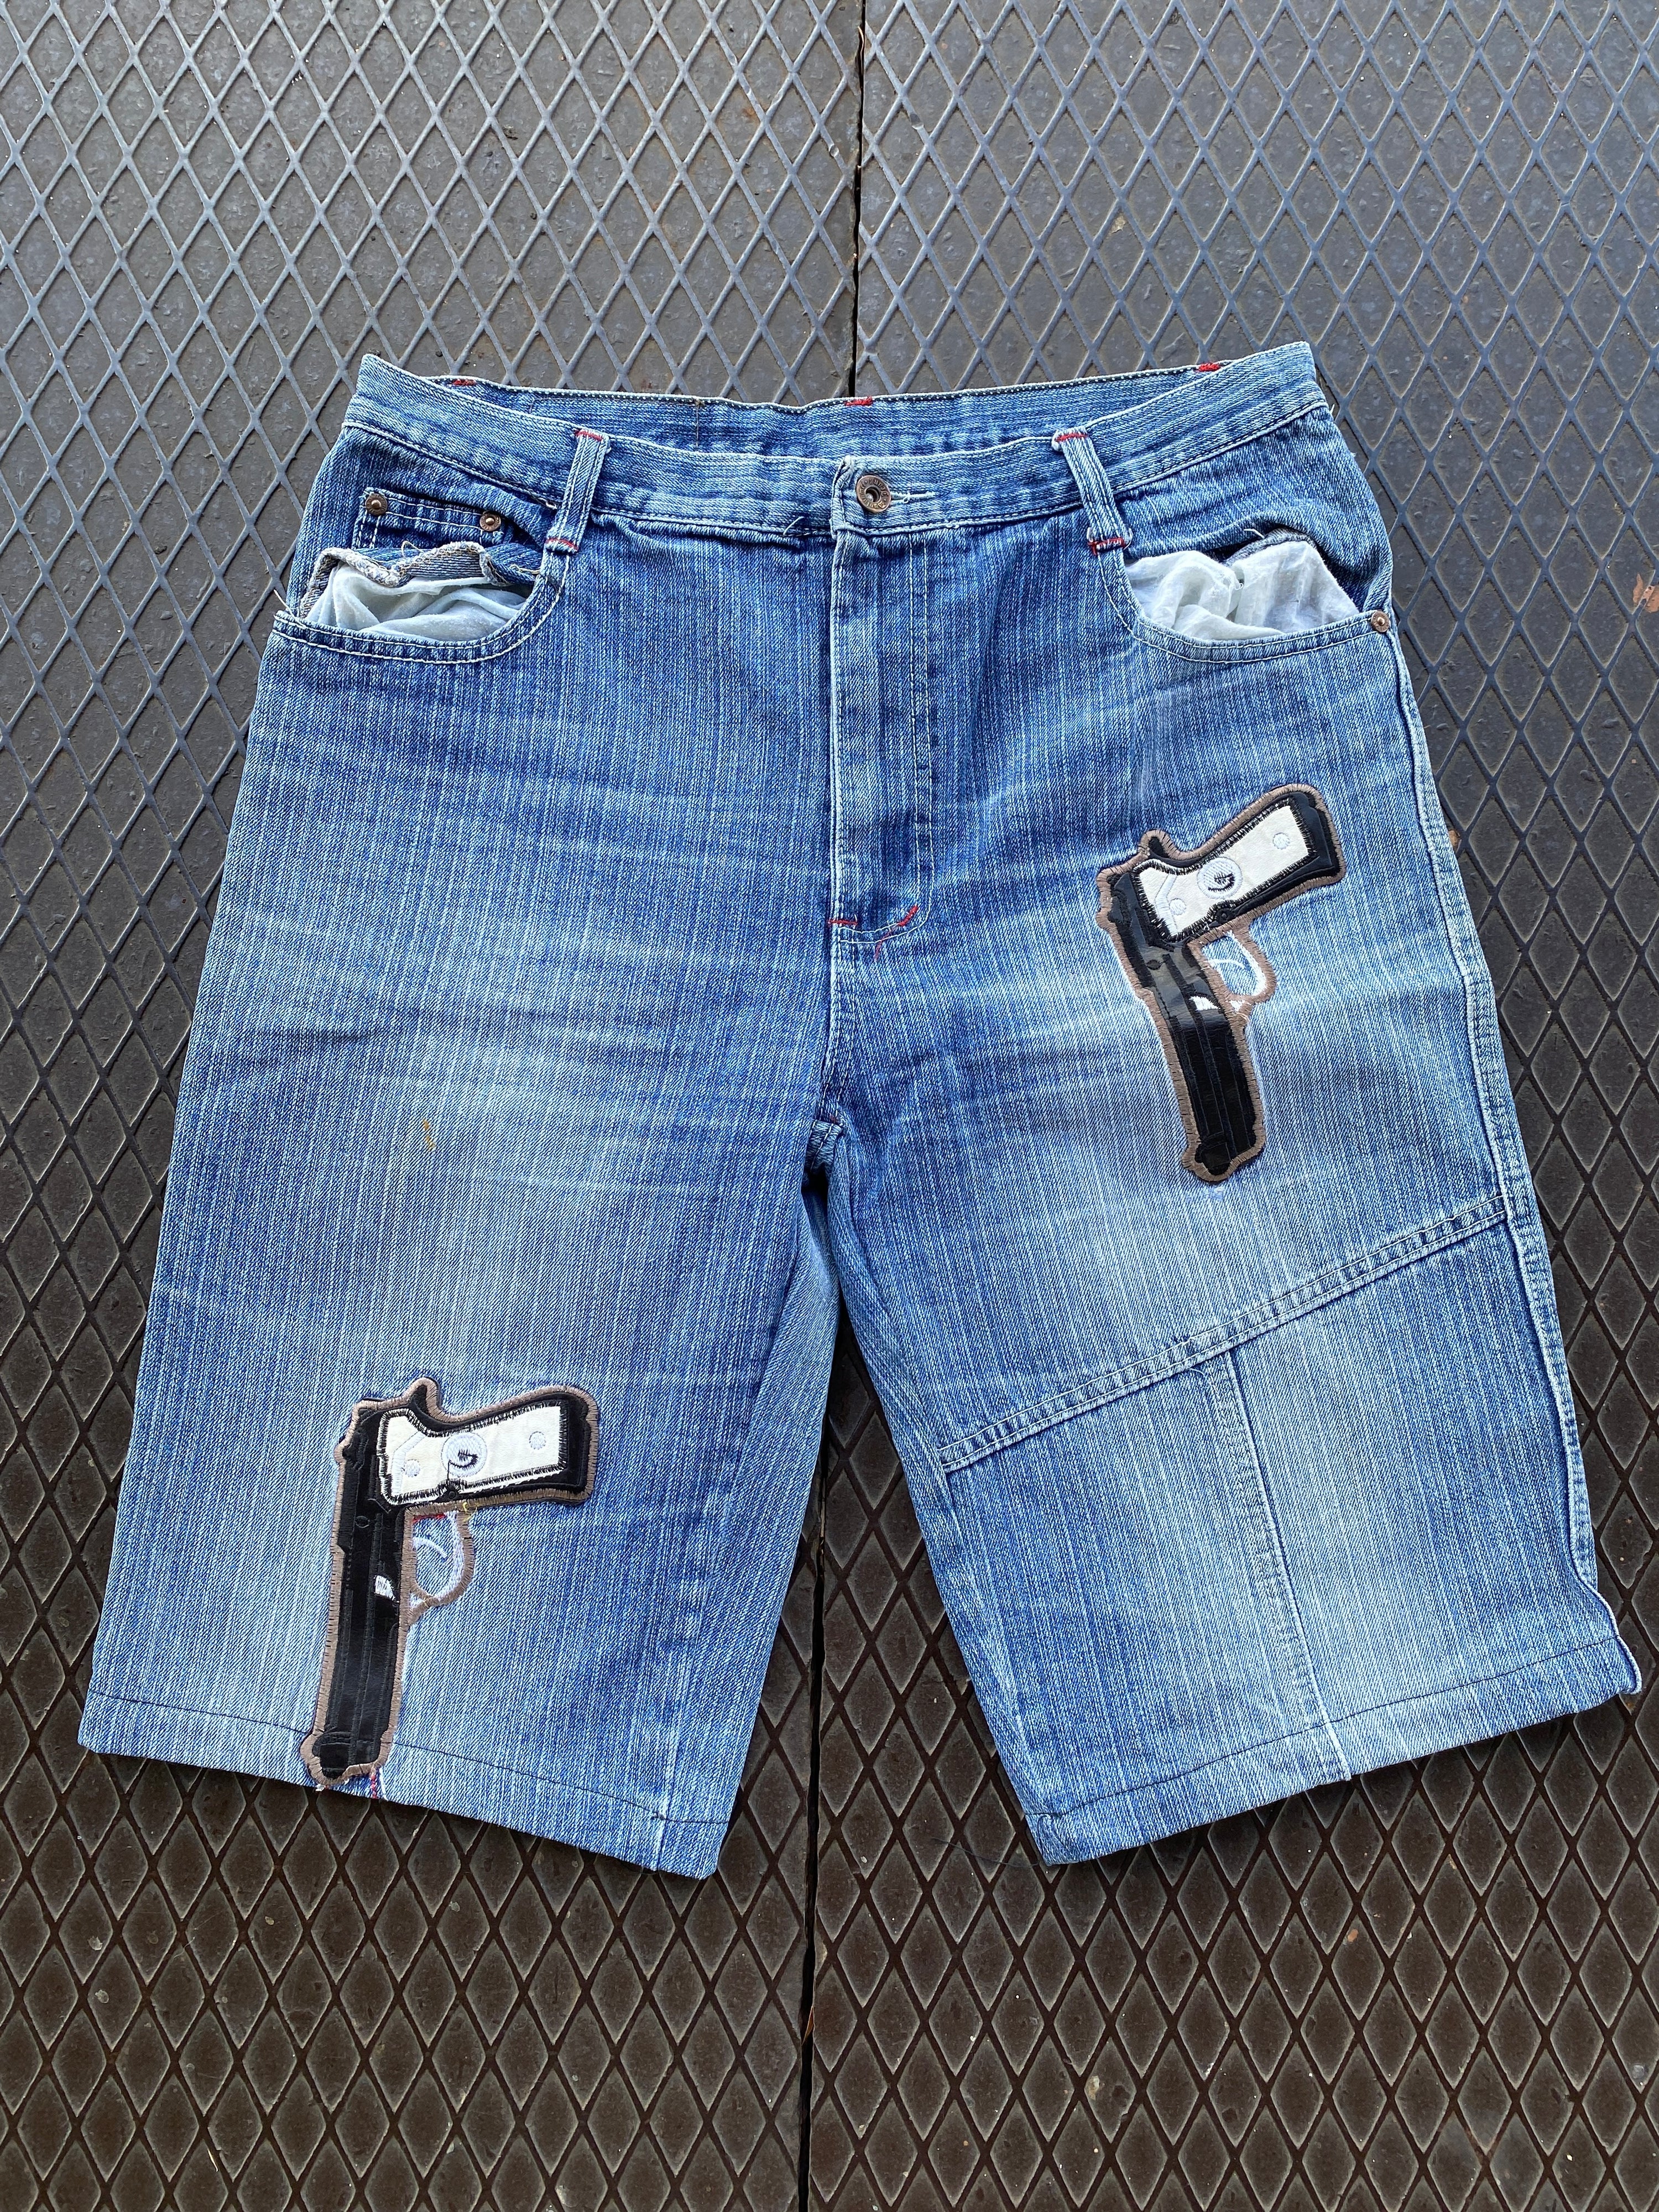 34 - D Jeans Denim Shorts Two Embroidered Guns